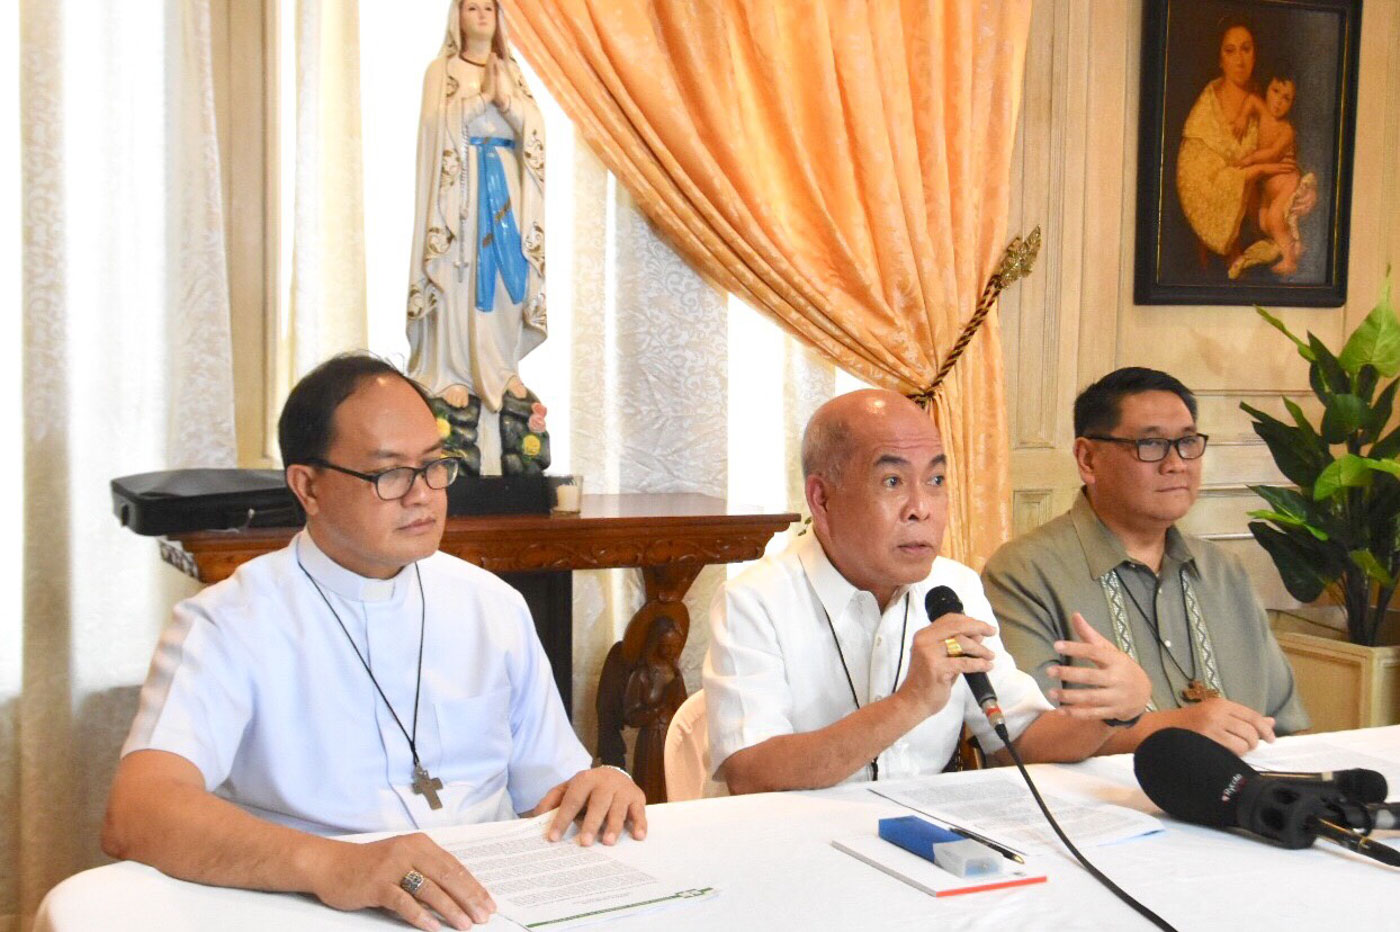 CATHOLIC LEADERS. CBCP president Davao Archbishop Romulo Valles (center) and CBCP vice president Caloocan Bishop Pablo Virgilio David (left) sit beside each other at a CBCP press conference on July 9, 2018. With them is another CBCP official, Pasig Bishop Mylo Hubert Vergara. Photo by Angie de Silva/Rappler  